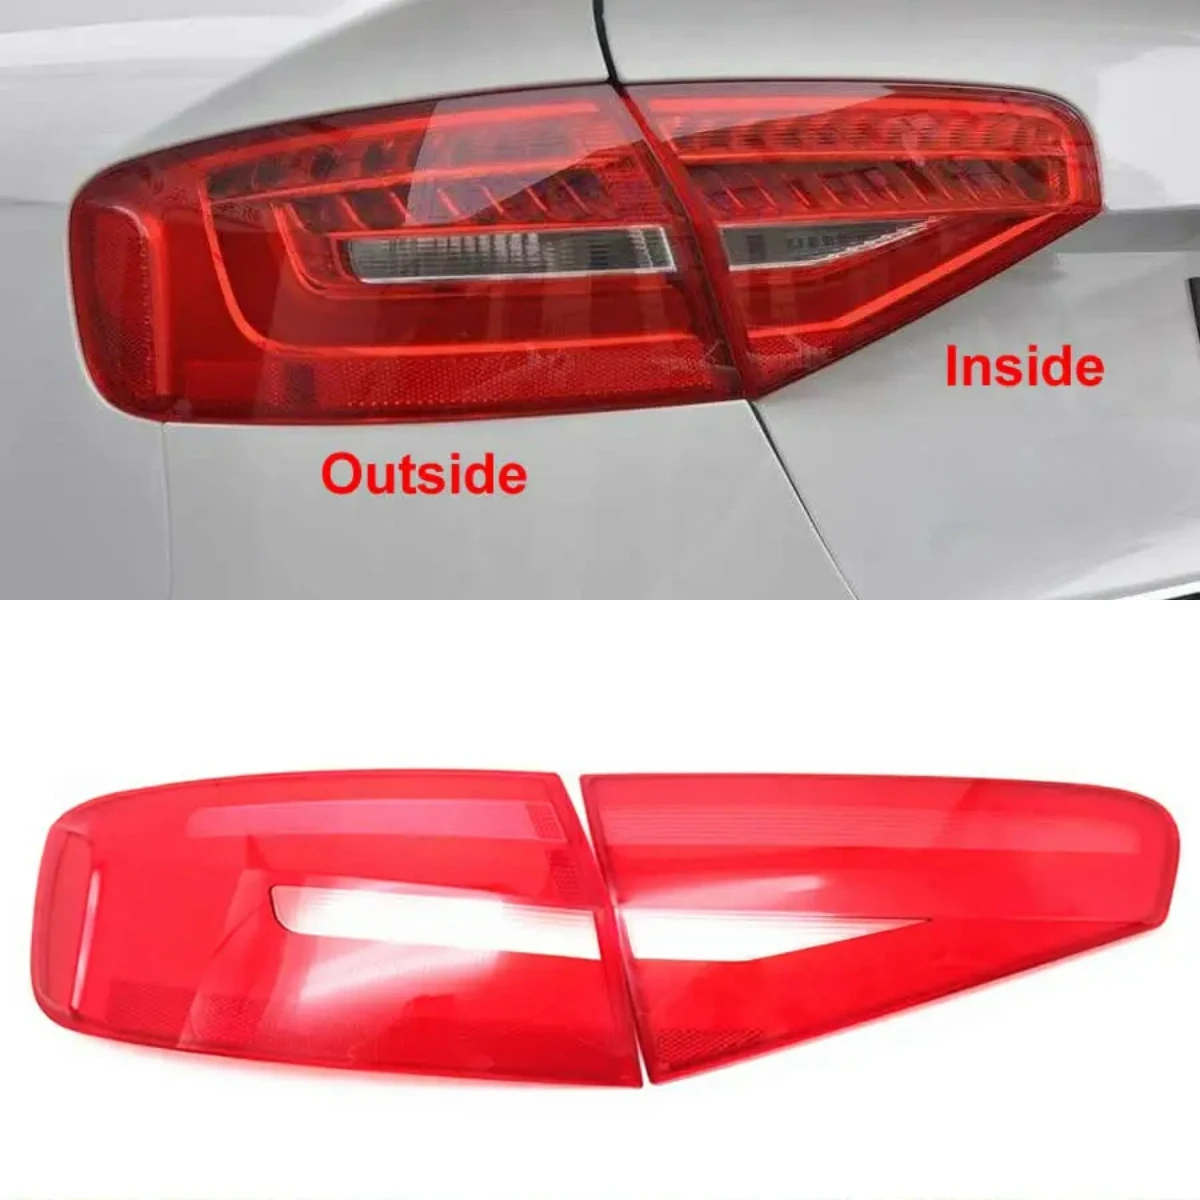 

For Audi A4 A4L B9 Car Taillight Shell Rear Signal Parking Lights Cover Replace The Original Lampshade 2013 2014 2015 2016